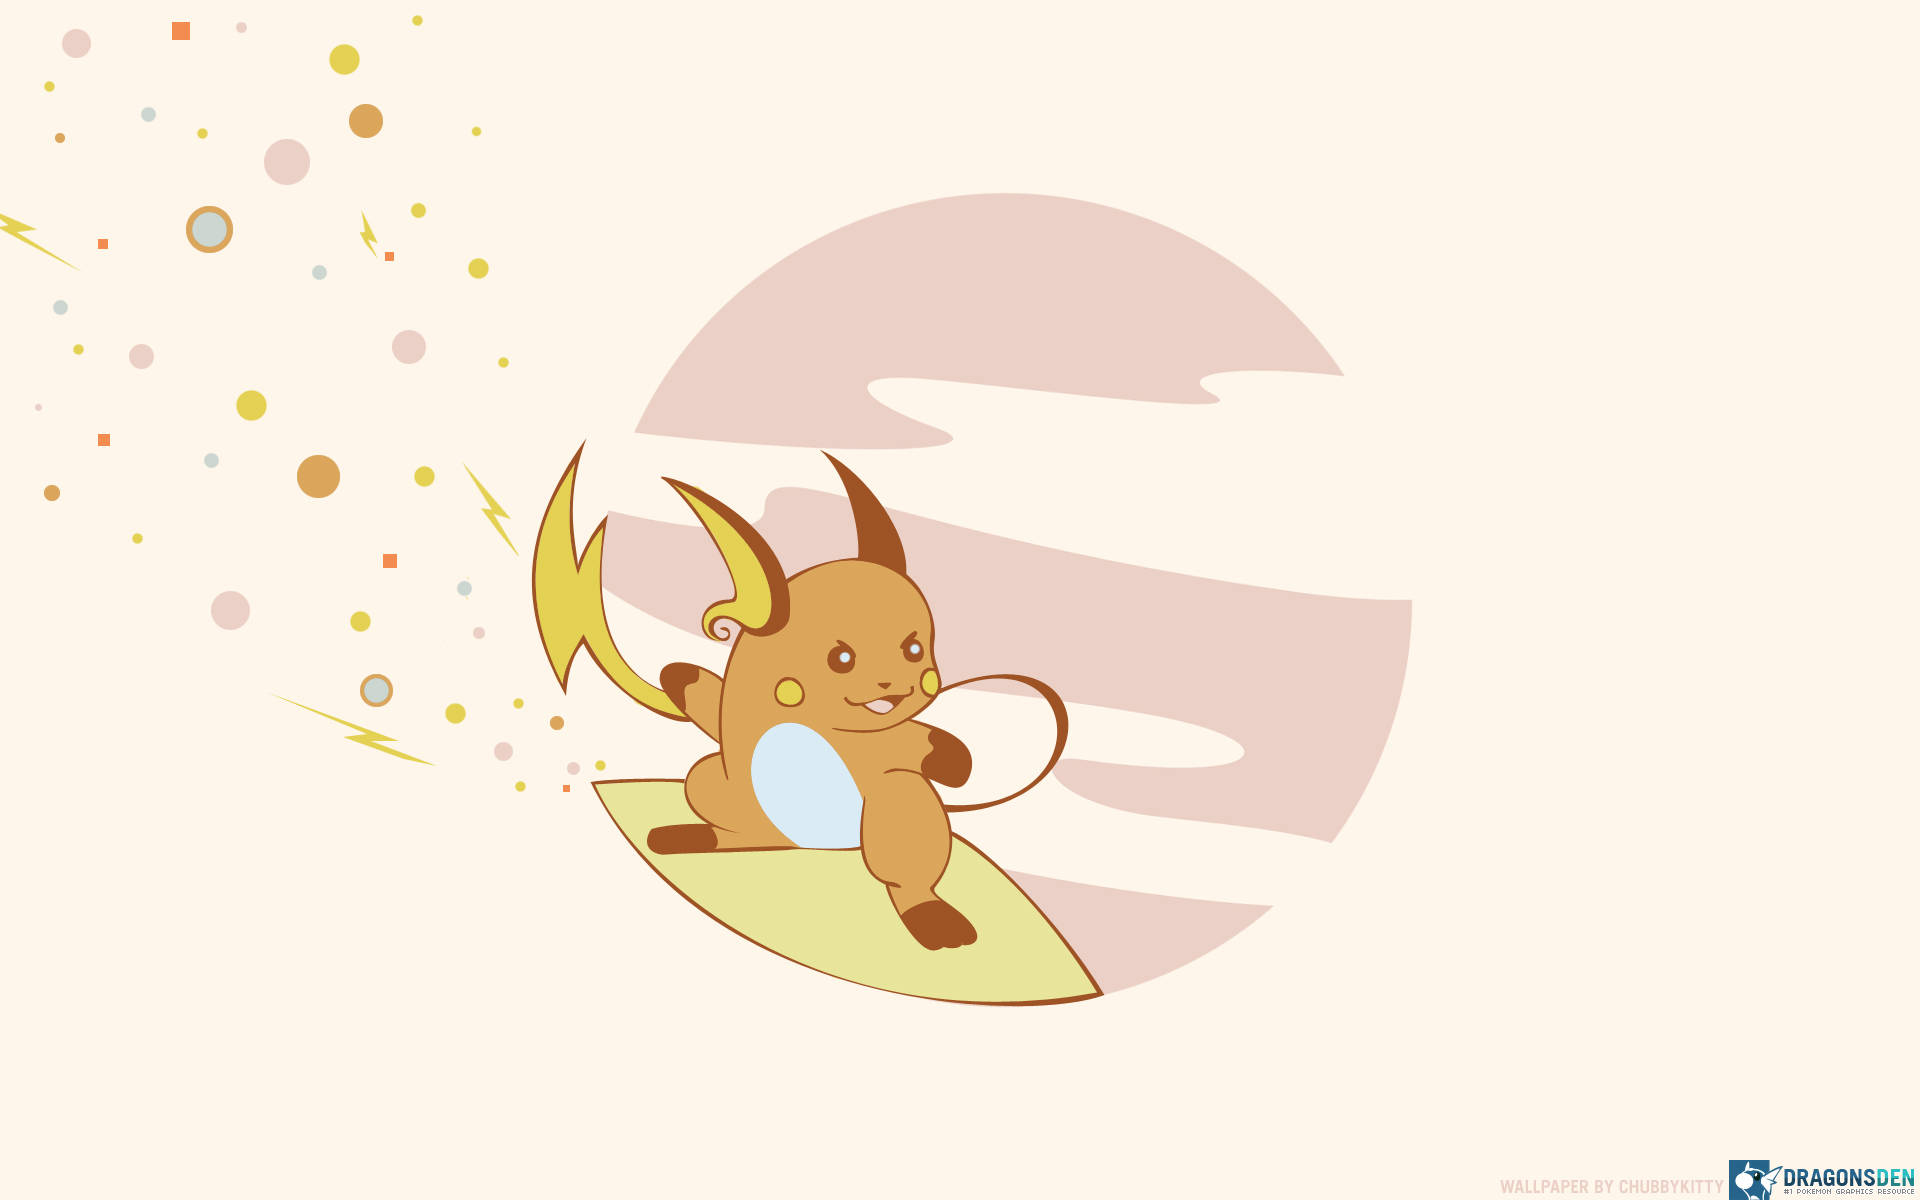 Ride the Surfing Wave with Raichu! Wallpaper